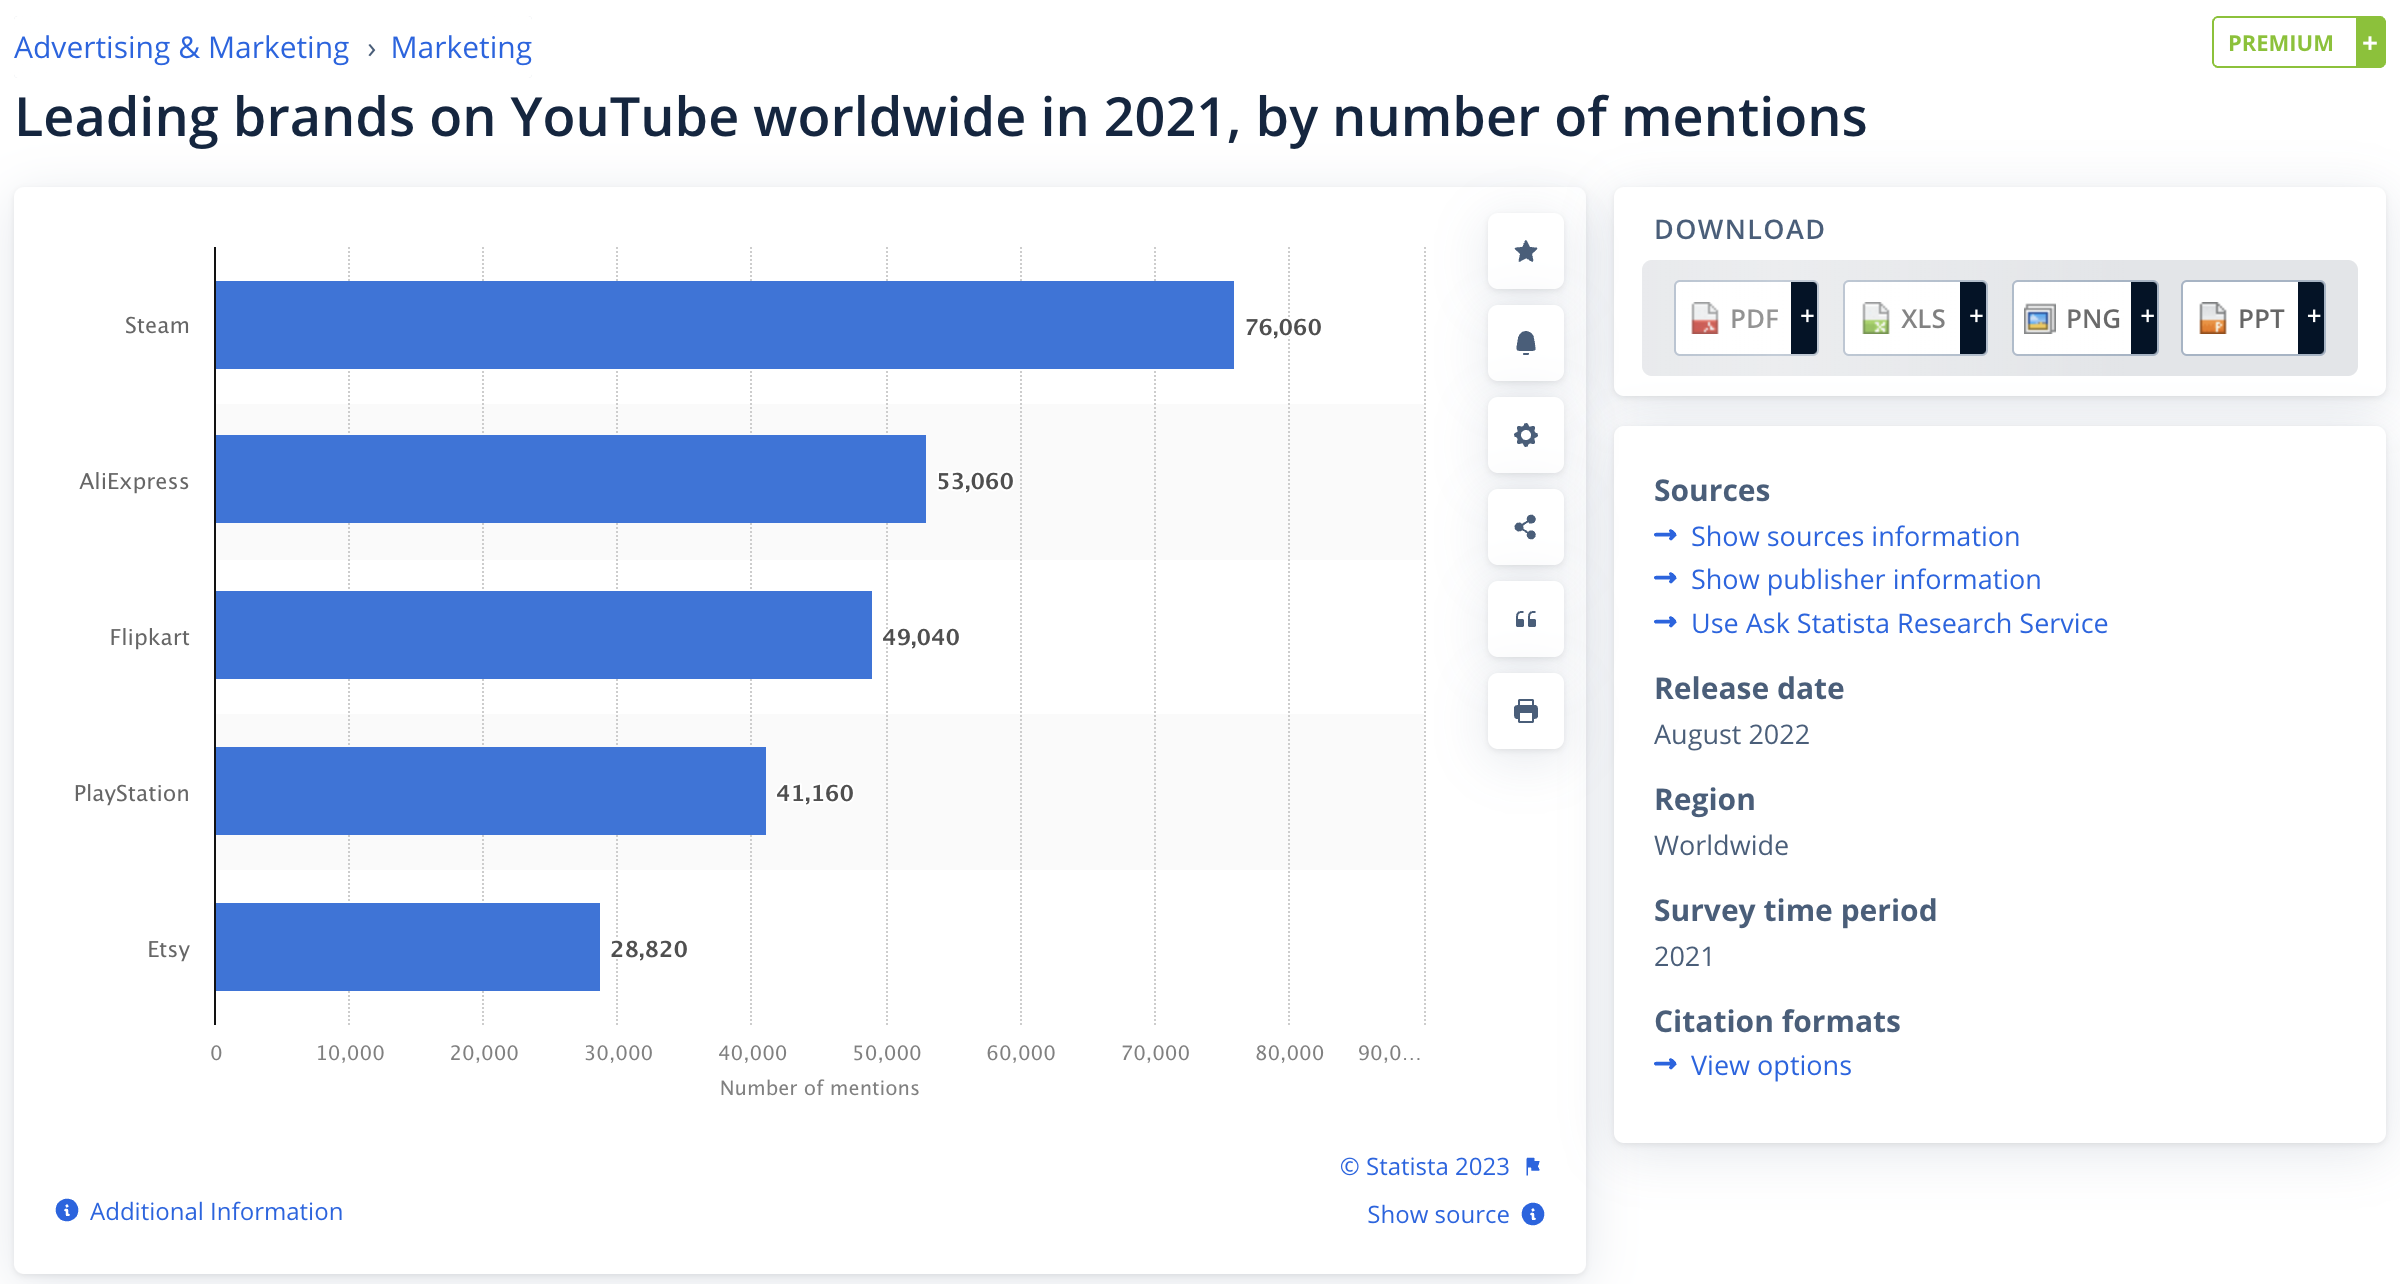 Screenshot from Statista showing leadings brands on YouTube worldwide by number of mentions